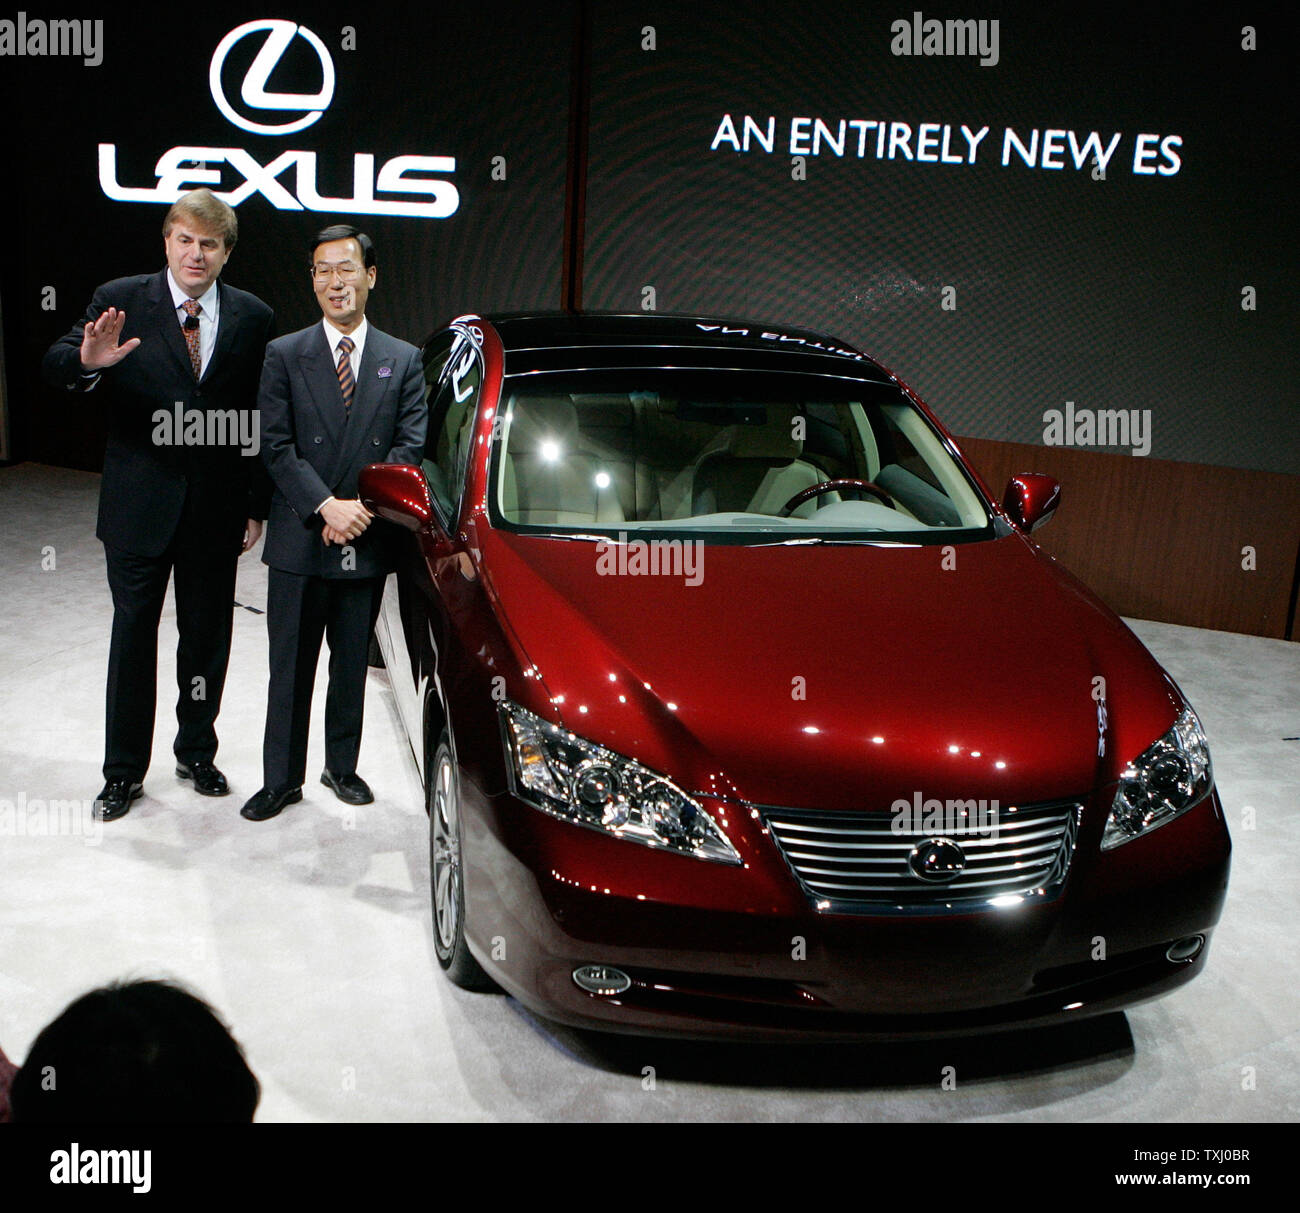 Lexus Group Vice President and General Manager Bob Carter, left, and Lexus Chief Engineer Hiroyuki Hirata unveil the Lexus ES 350 at the 2006 Chicago Auto Show on February 8, 2006 at McCormick Place in Chicago. (UPI Photo/Brian Kersey) Stock Photo